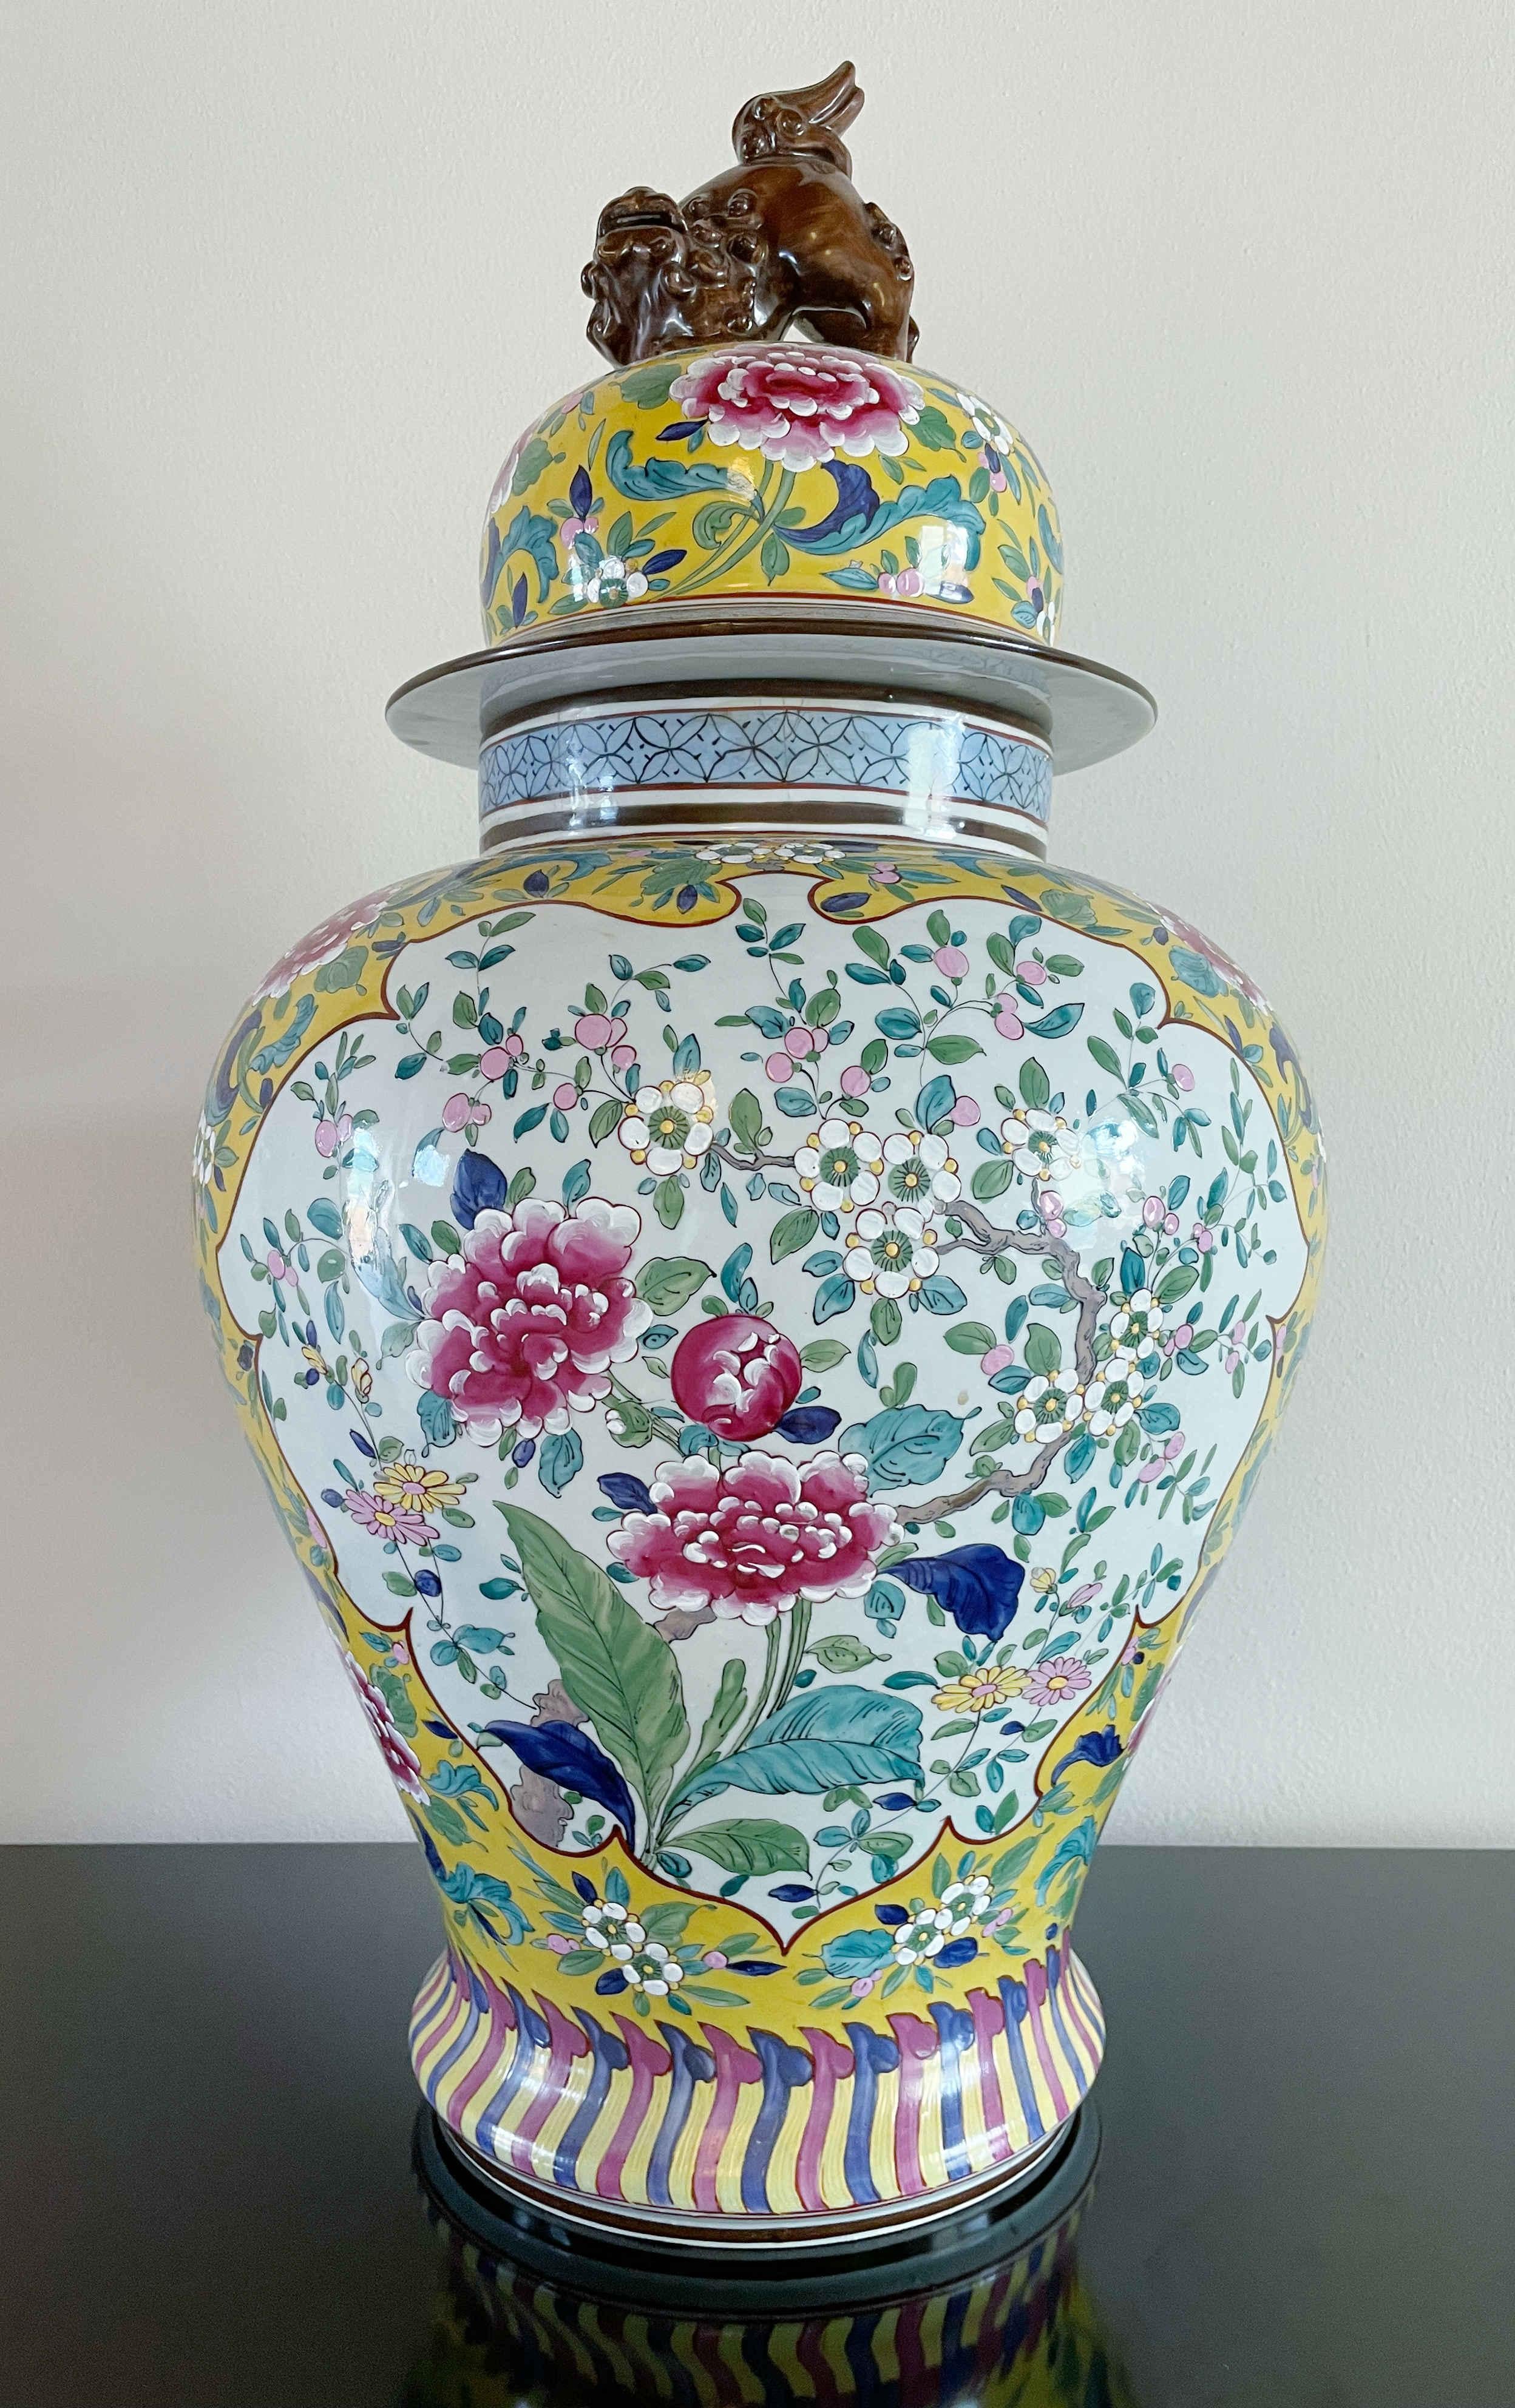 Chinese famille jaune porcelain covered jar with floral designs and foo dog wooden finial
Height 29.5 inches / Diameter 16 inches
1 available in stock in Italy
* some repairs have been carried out, please see them circled in red in the images
Order